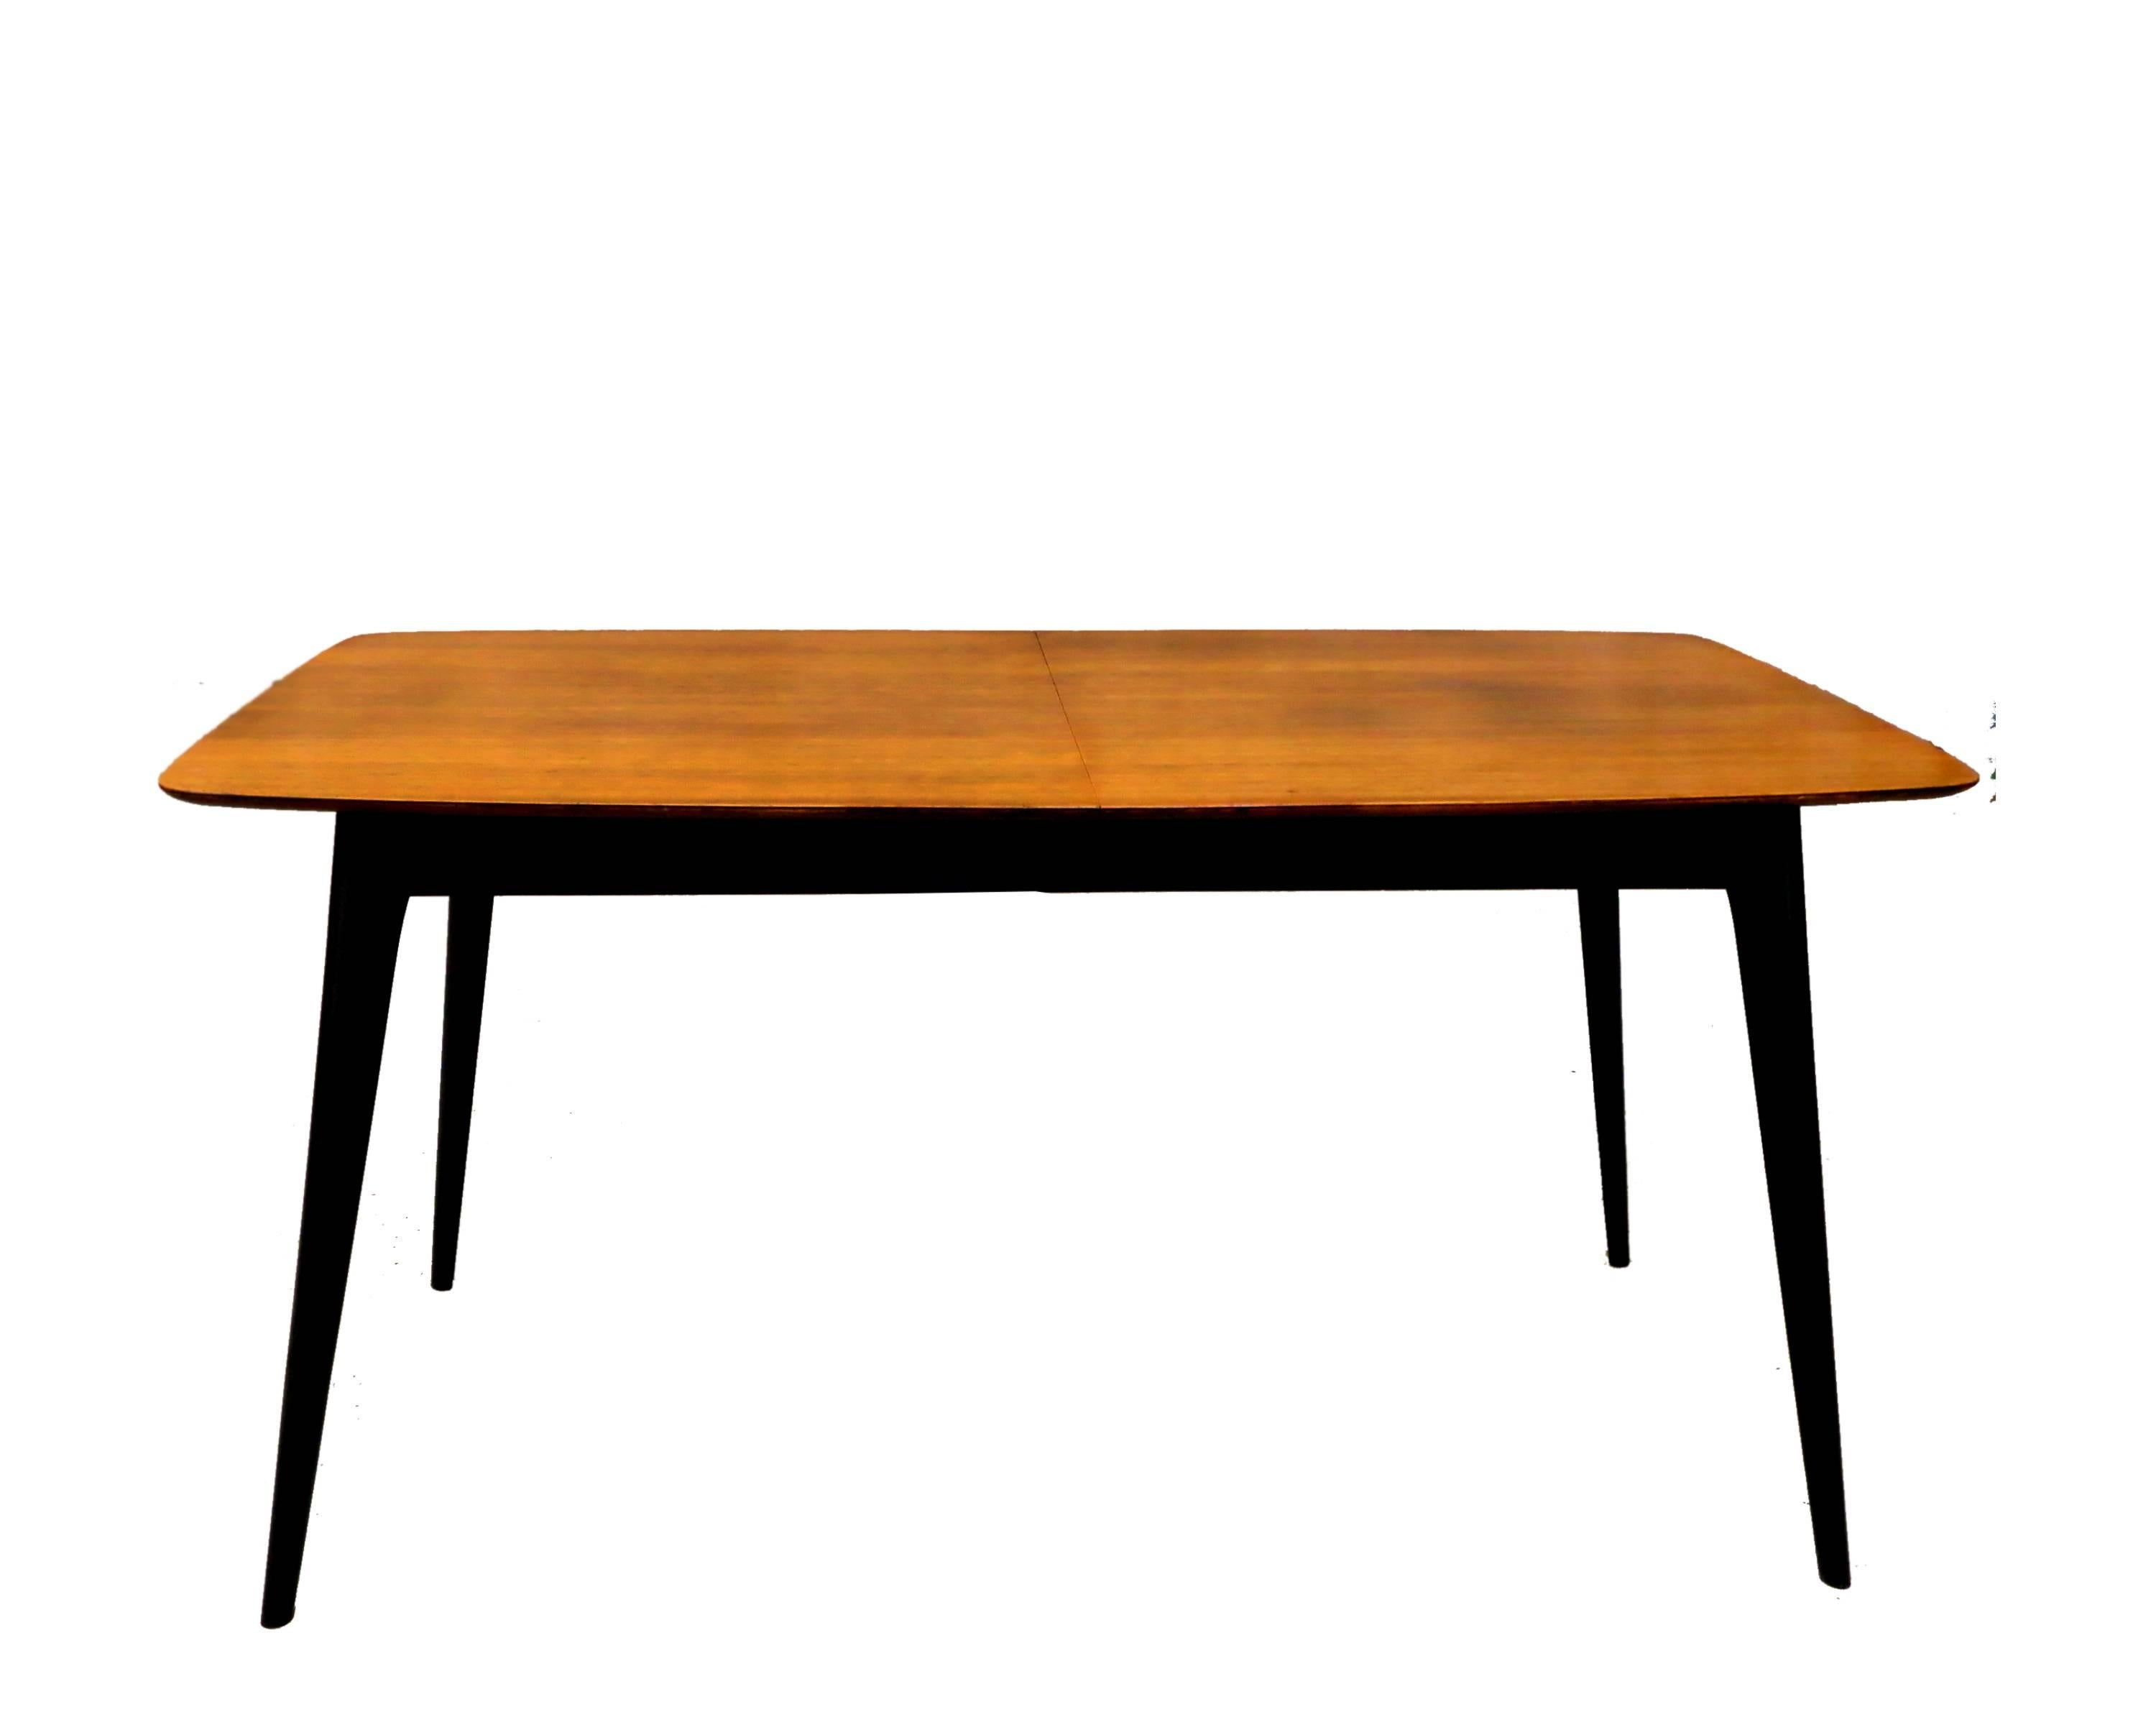 Mid-Century Modern Modernist Dining Table, by Belgian Architect and Designer Alfred Hendrickx